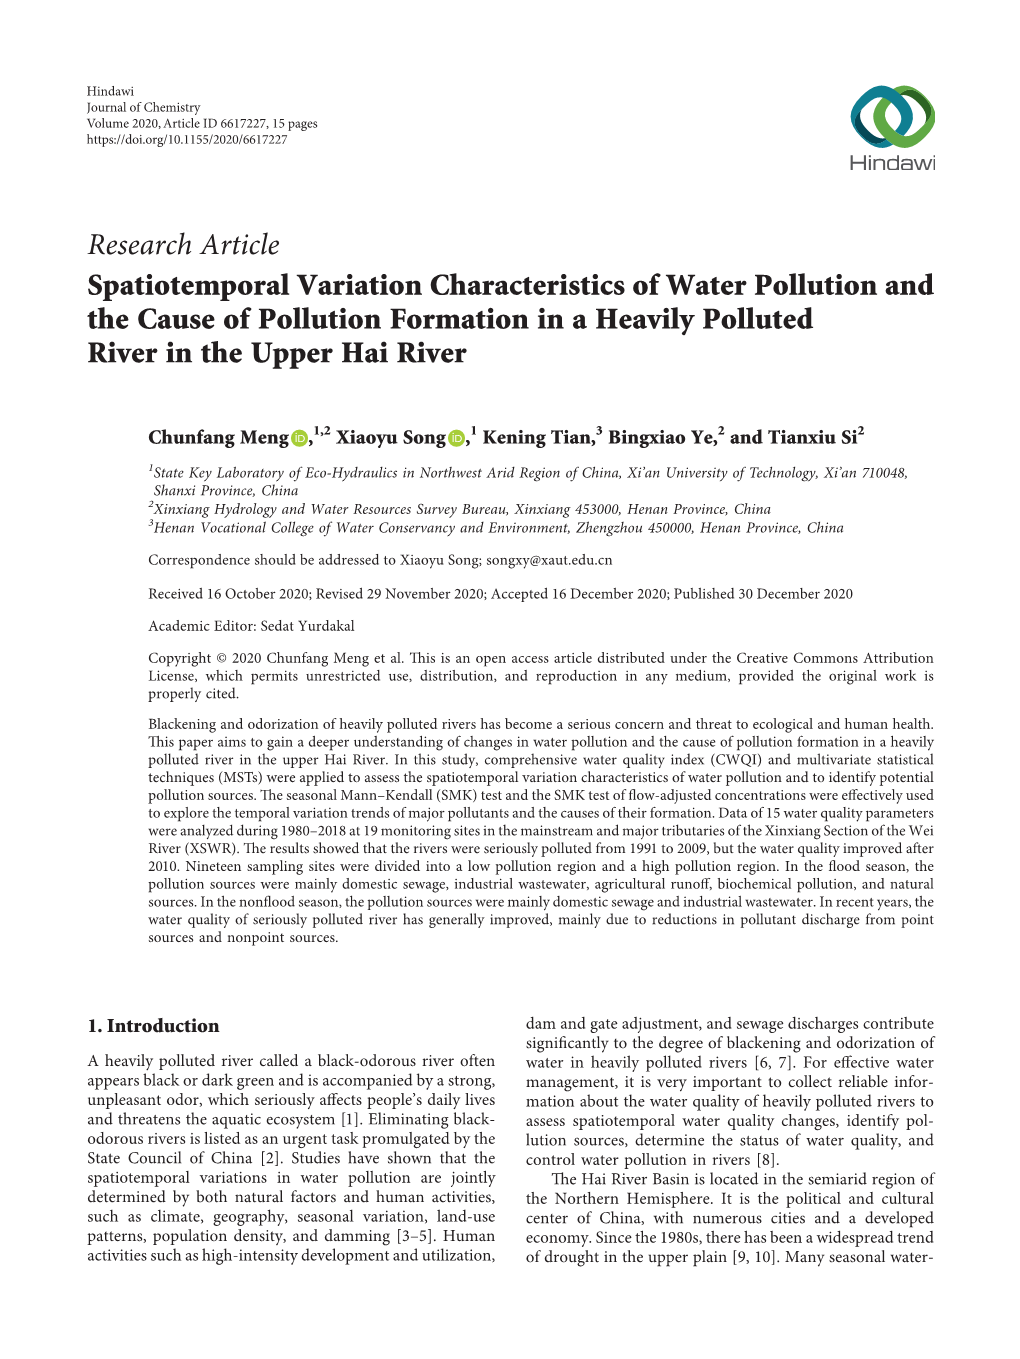 Spatiotemporal Variation Characteristics of Water Pollution and the Cause of Pollution Formation in a Heavily Polluted River in the Upper Hai River